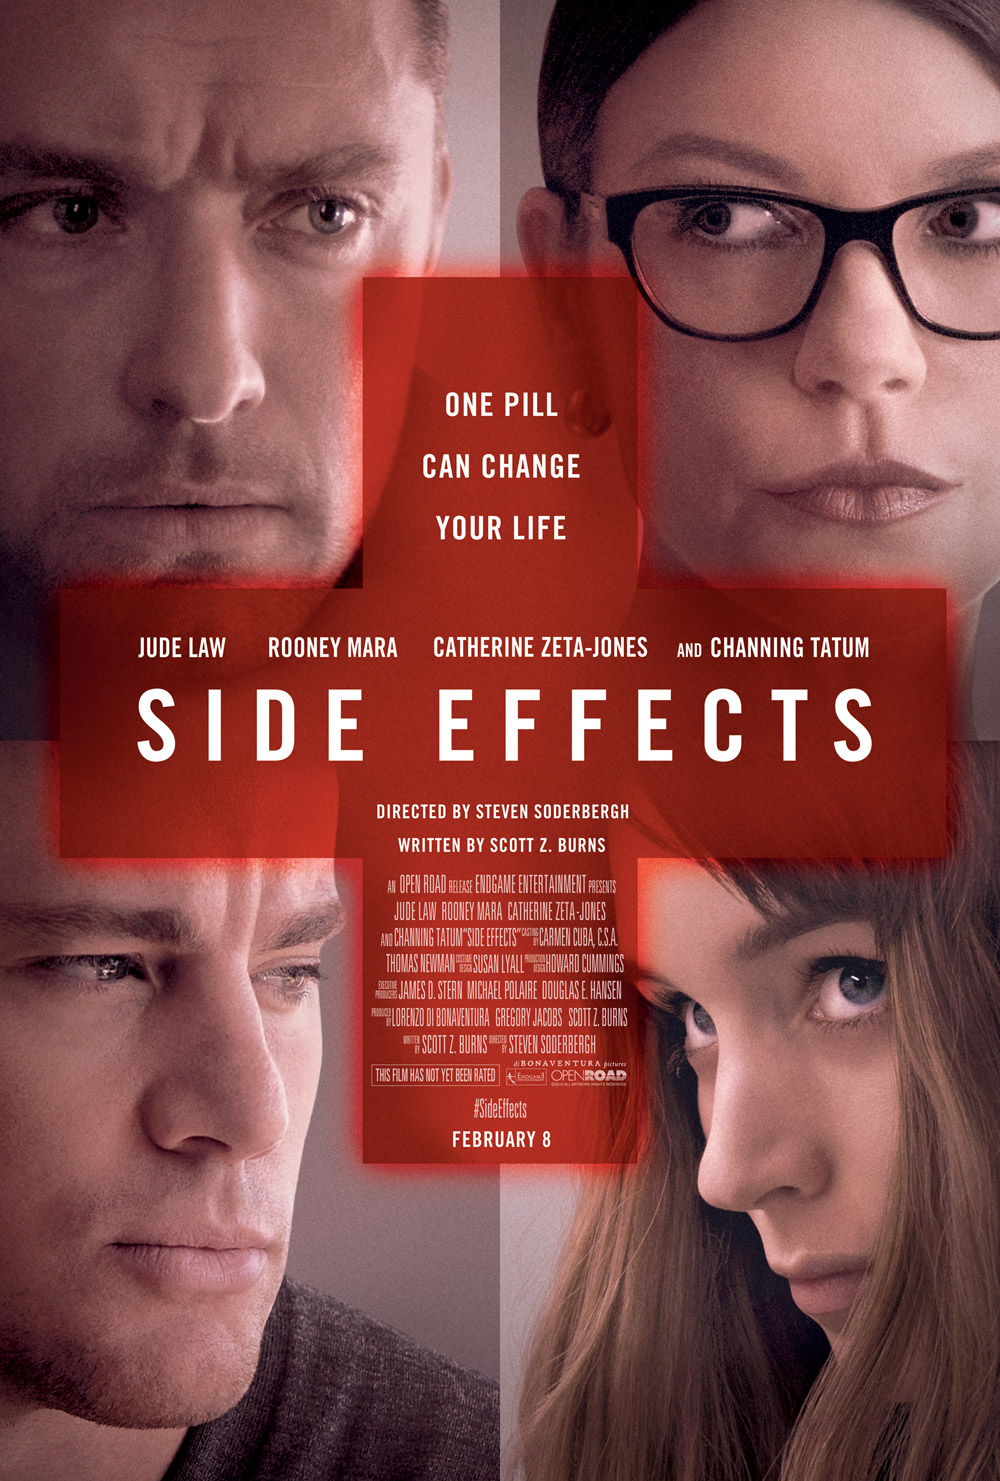 Poster for "Side Effects"